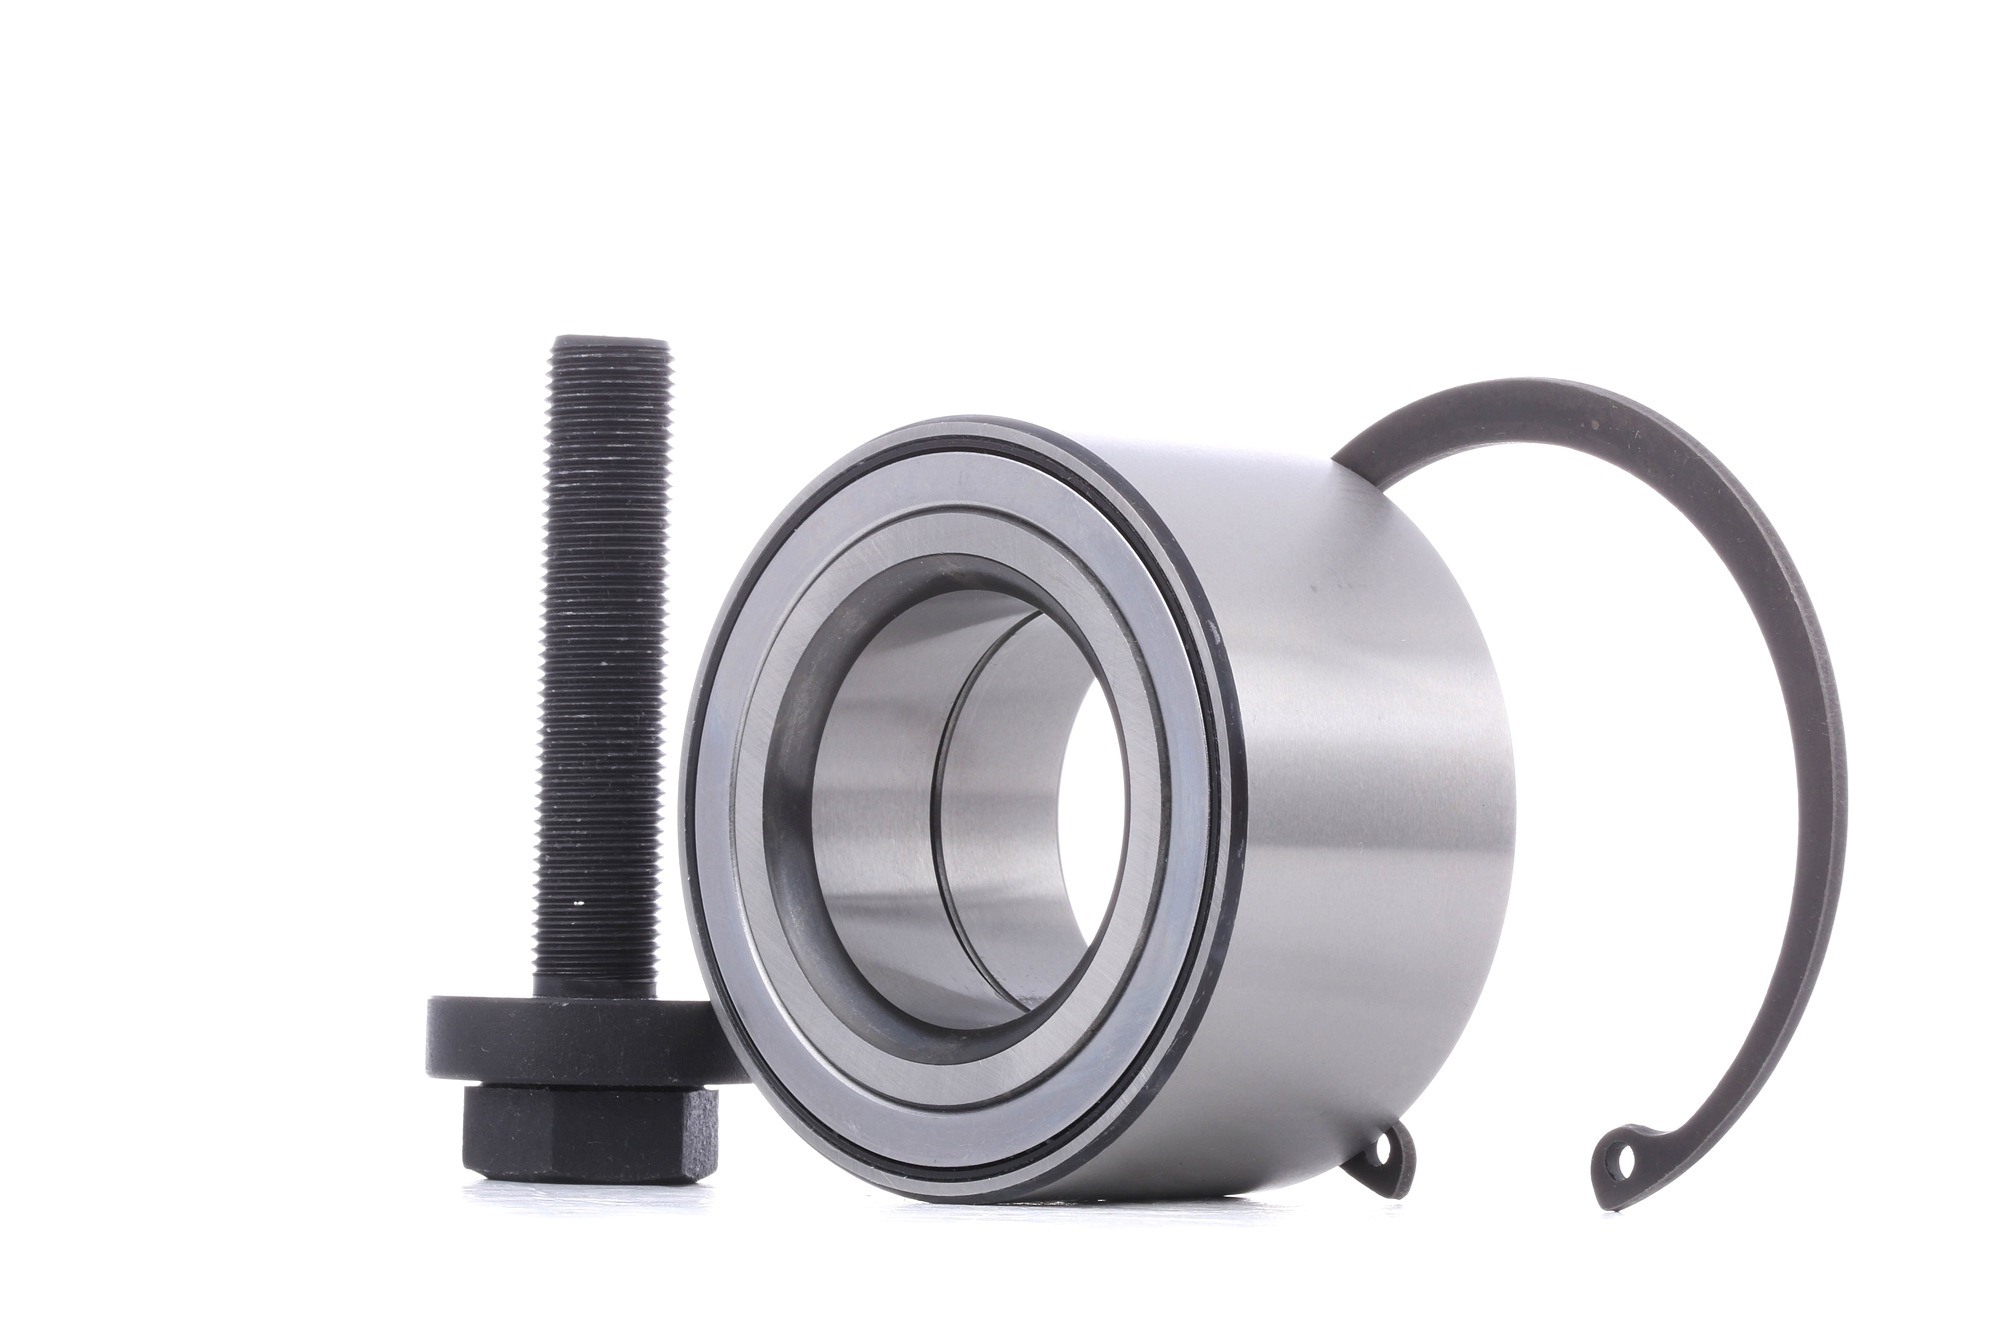 STARK SKWB-0181077 Wheel bearing kit Front axle both sides, with integrated magnetic sensor ring, 88 mm